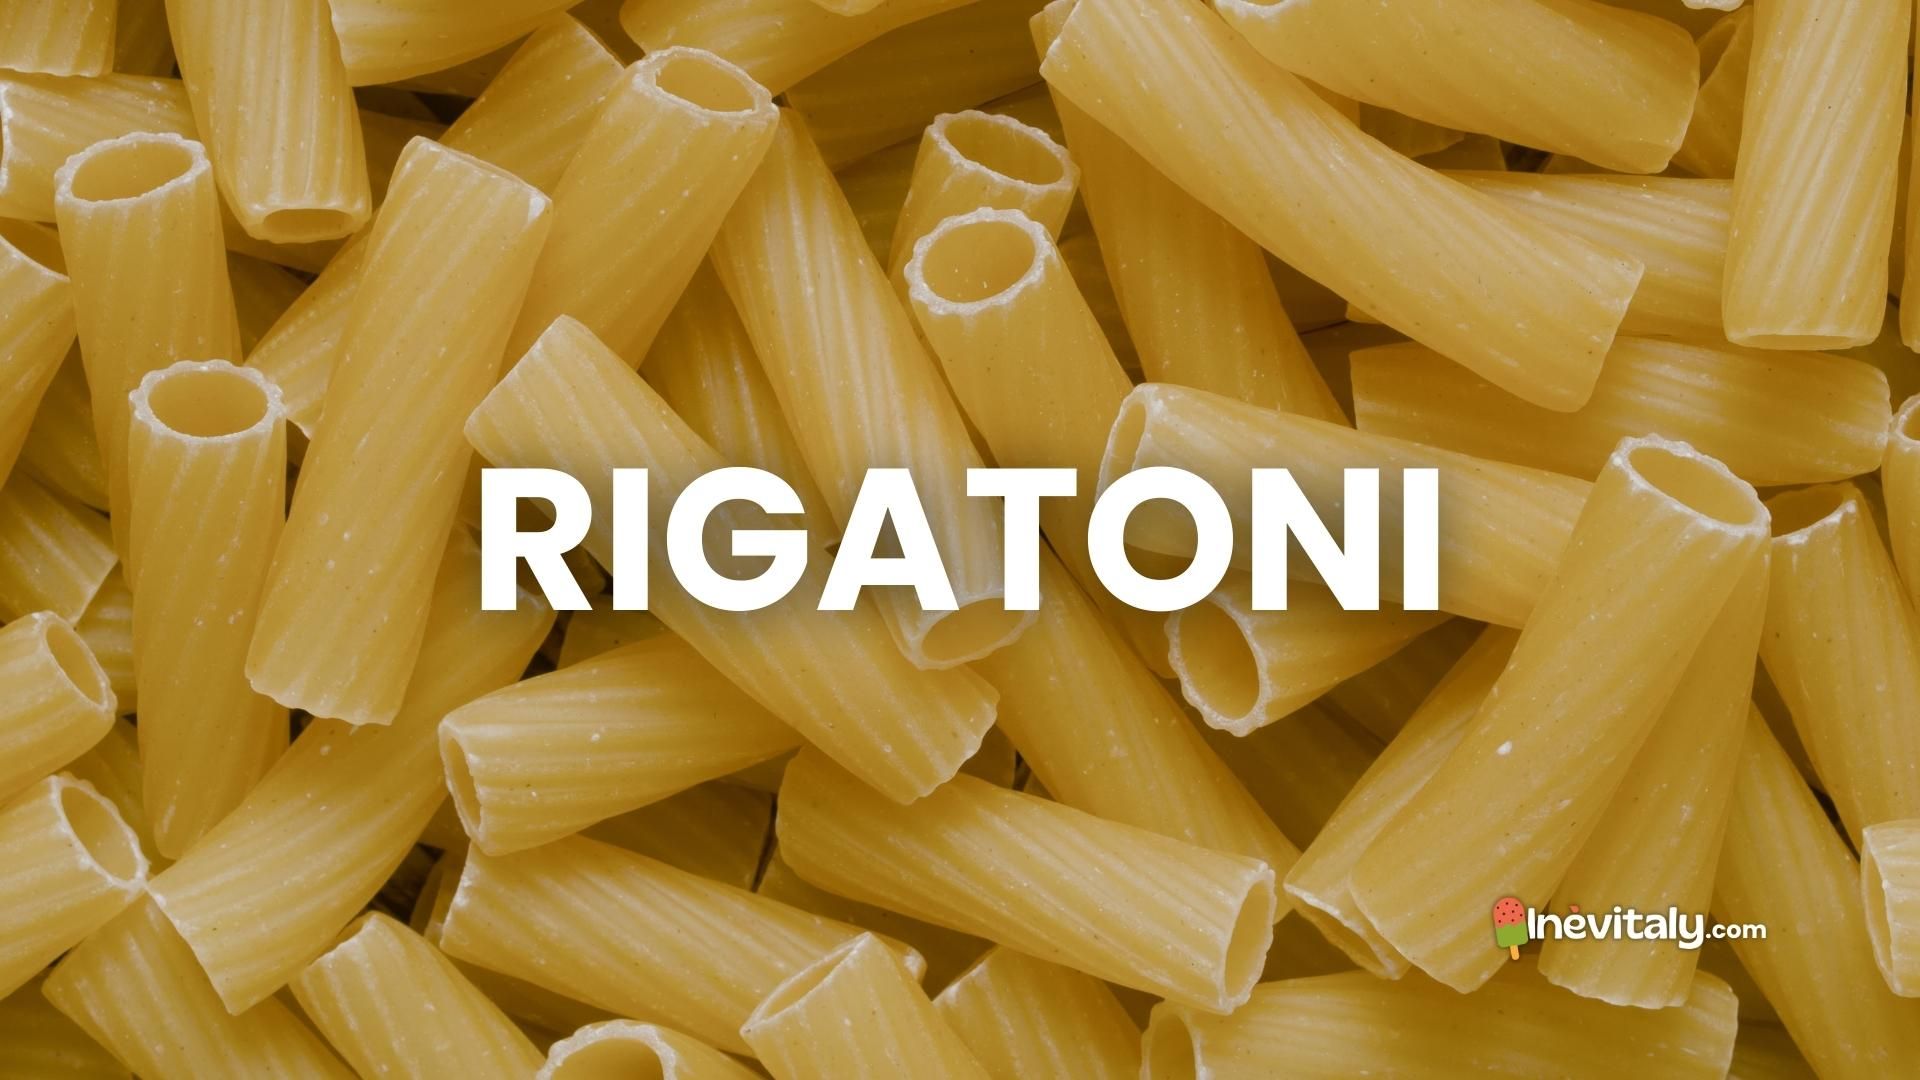 How to Say Penne: Mastering Italian Pasta Pronunciation